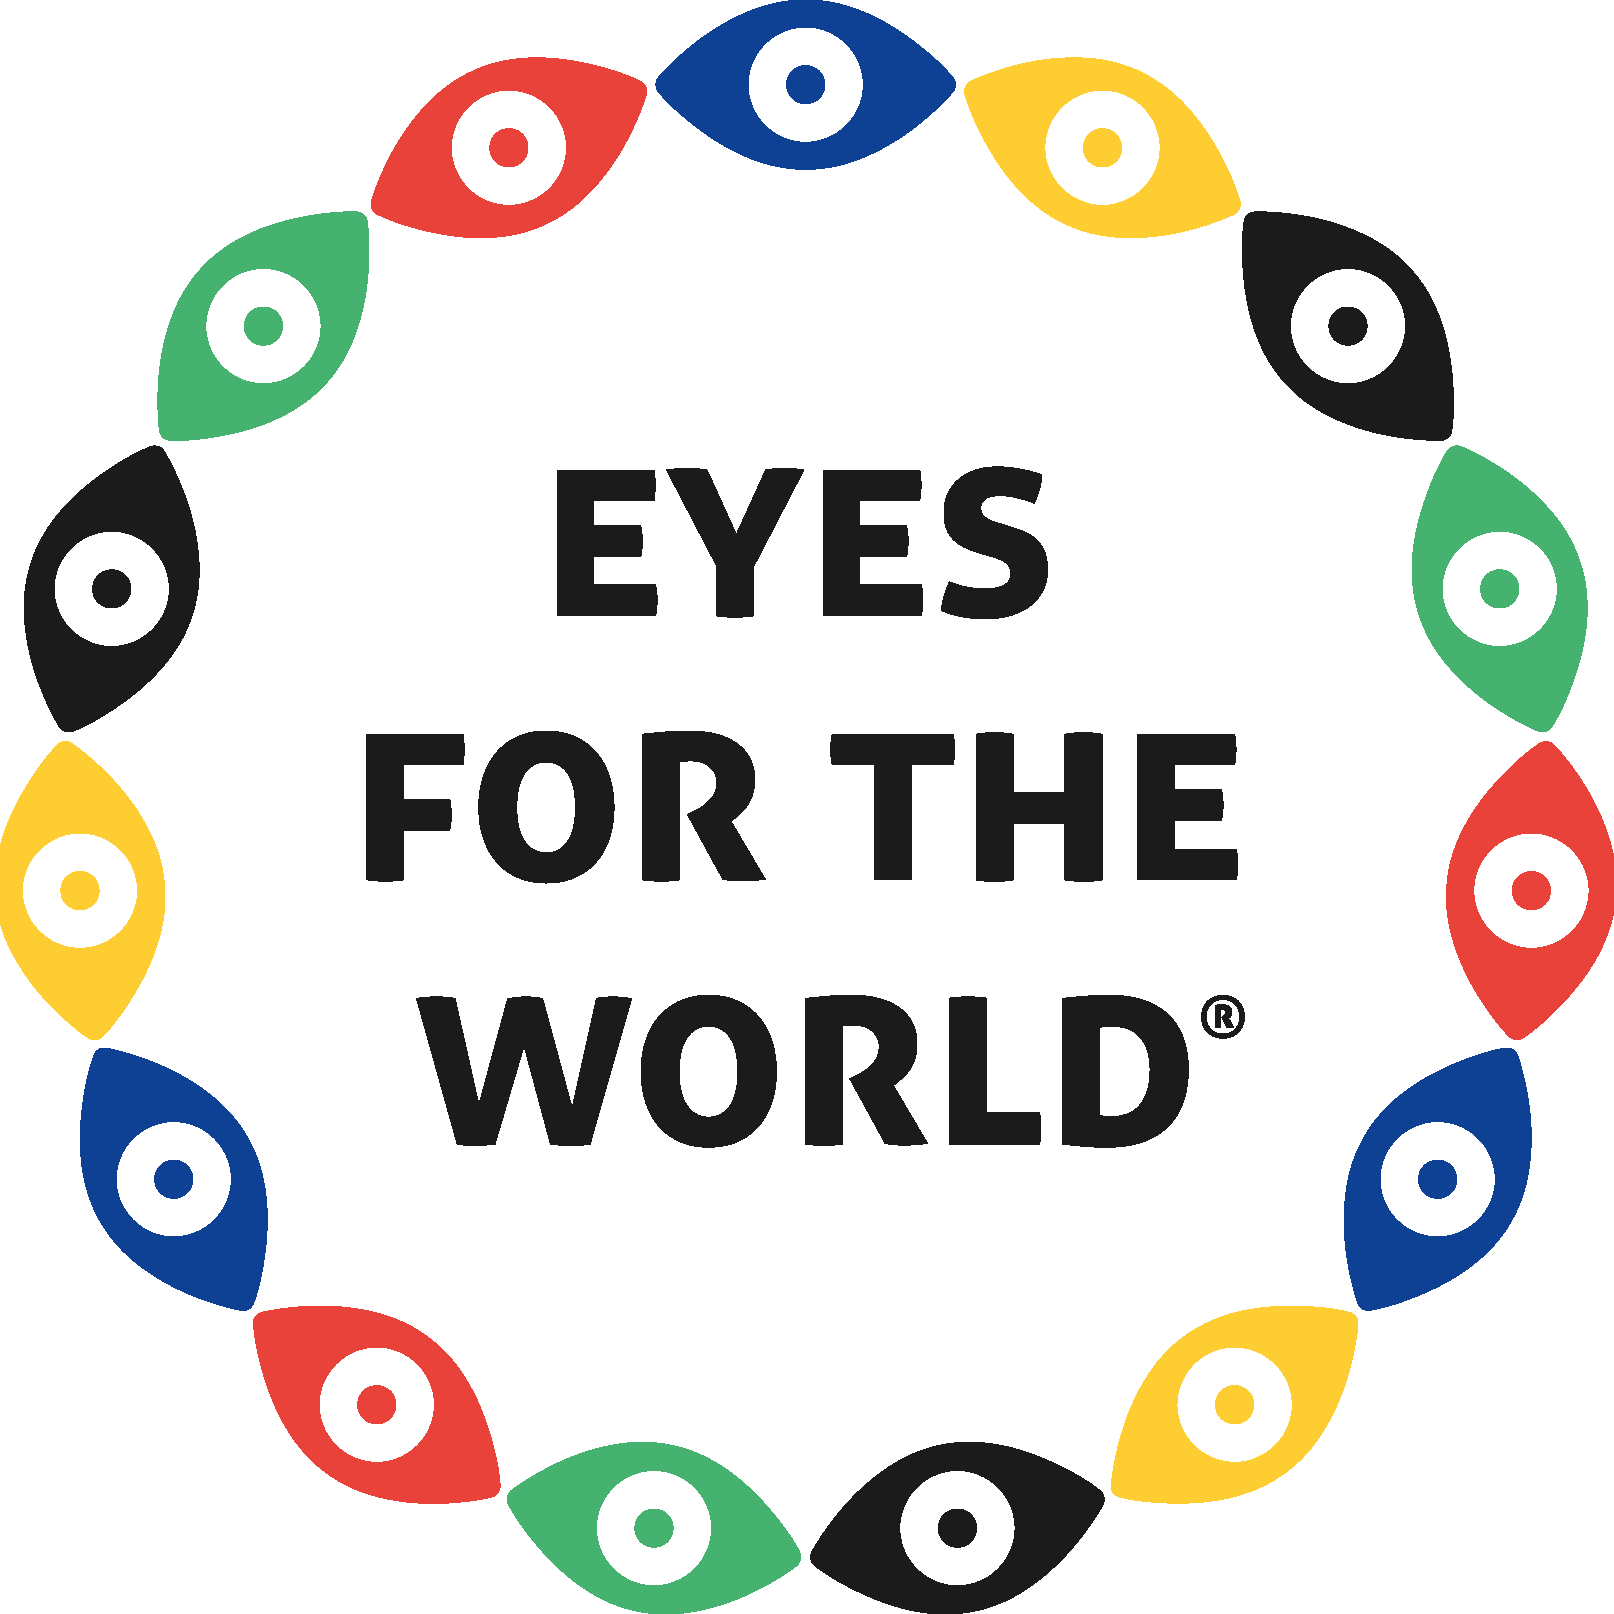 Steun Eyes for the World via Steunons.be